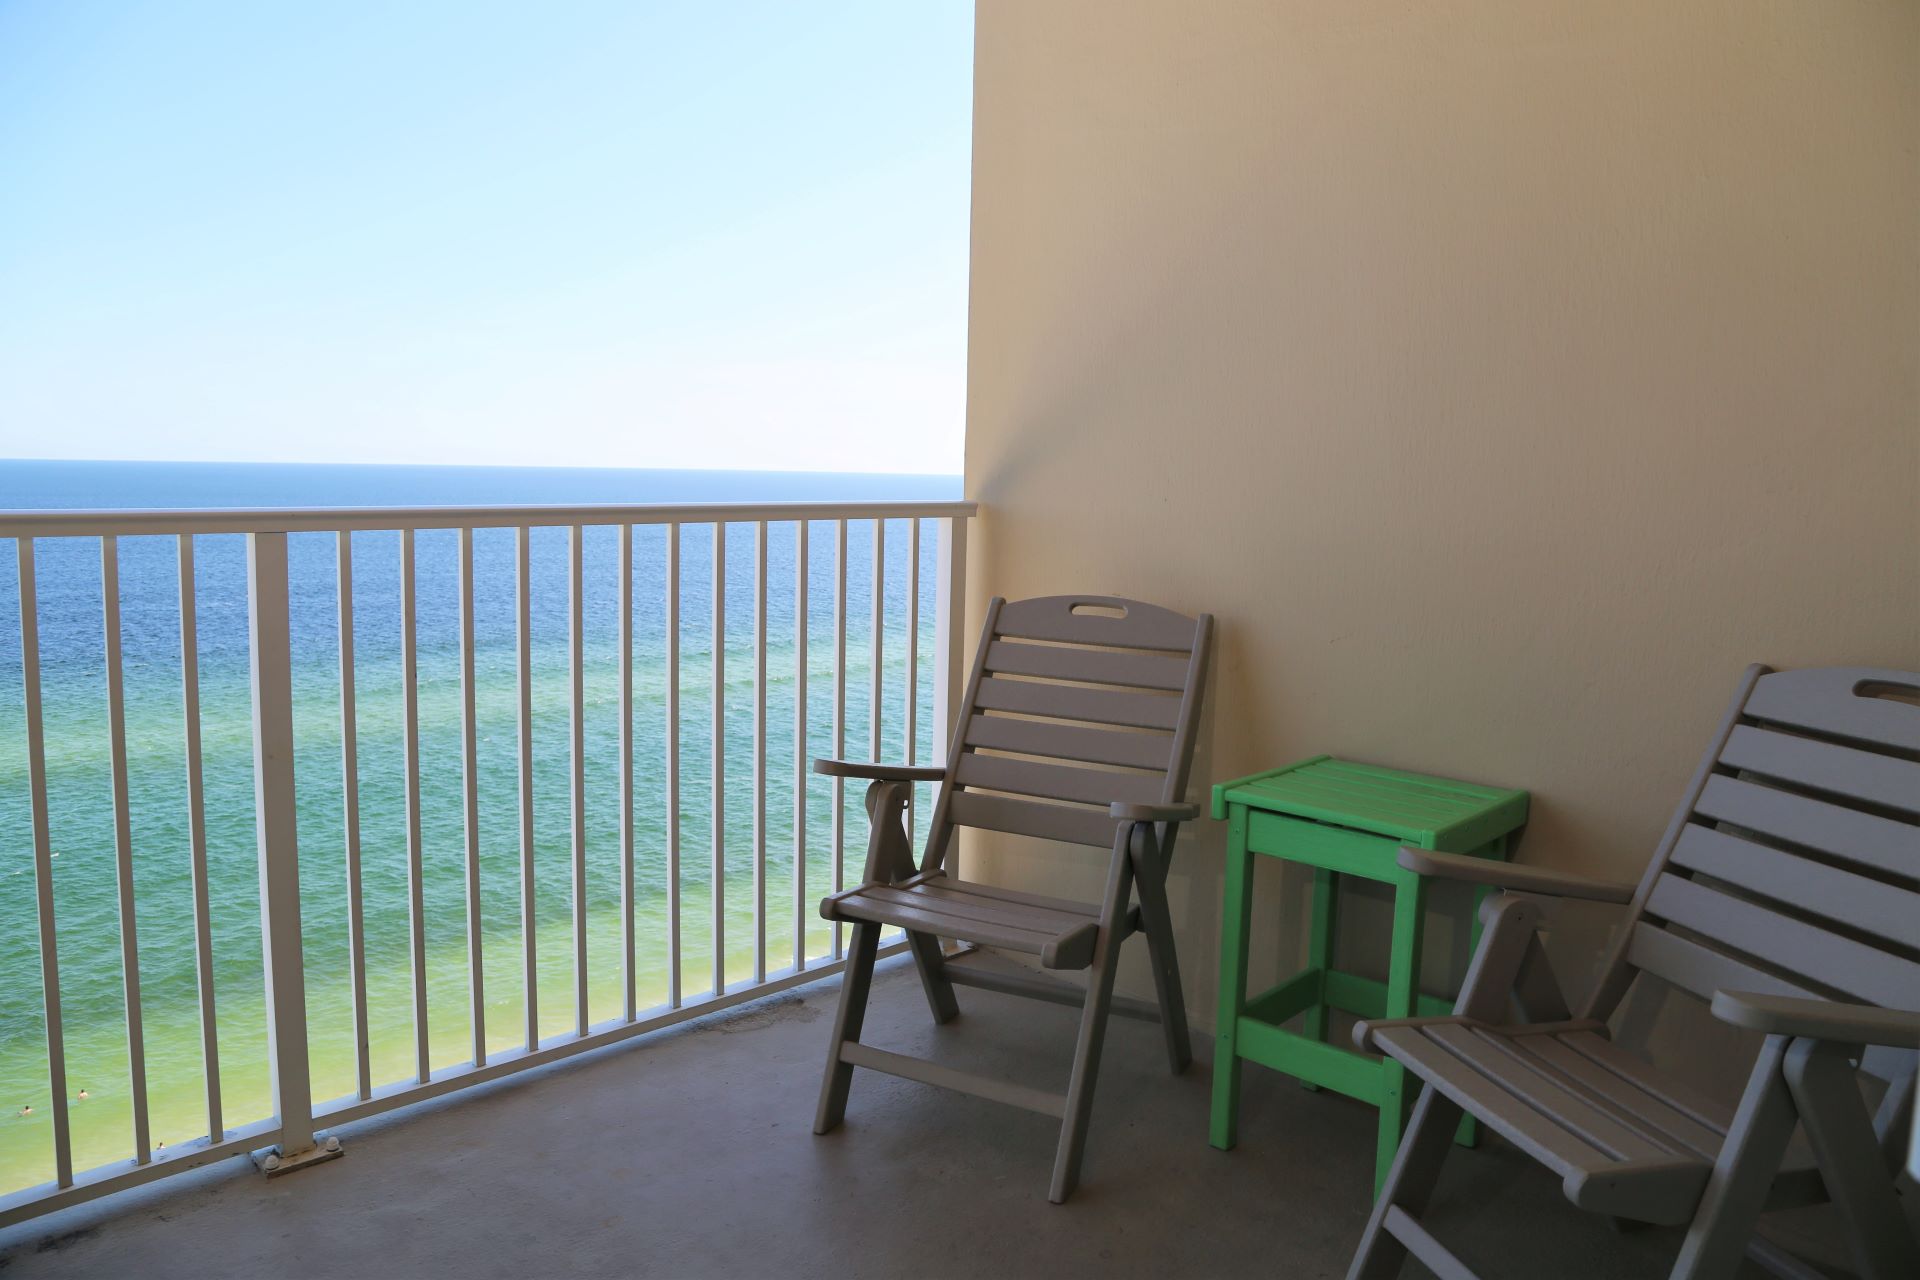 Coastal views from the comfort of your private balcony.